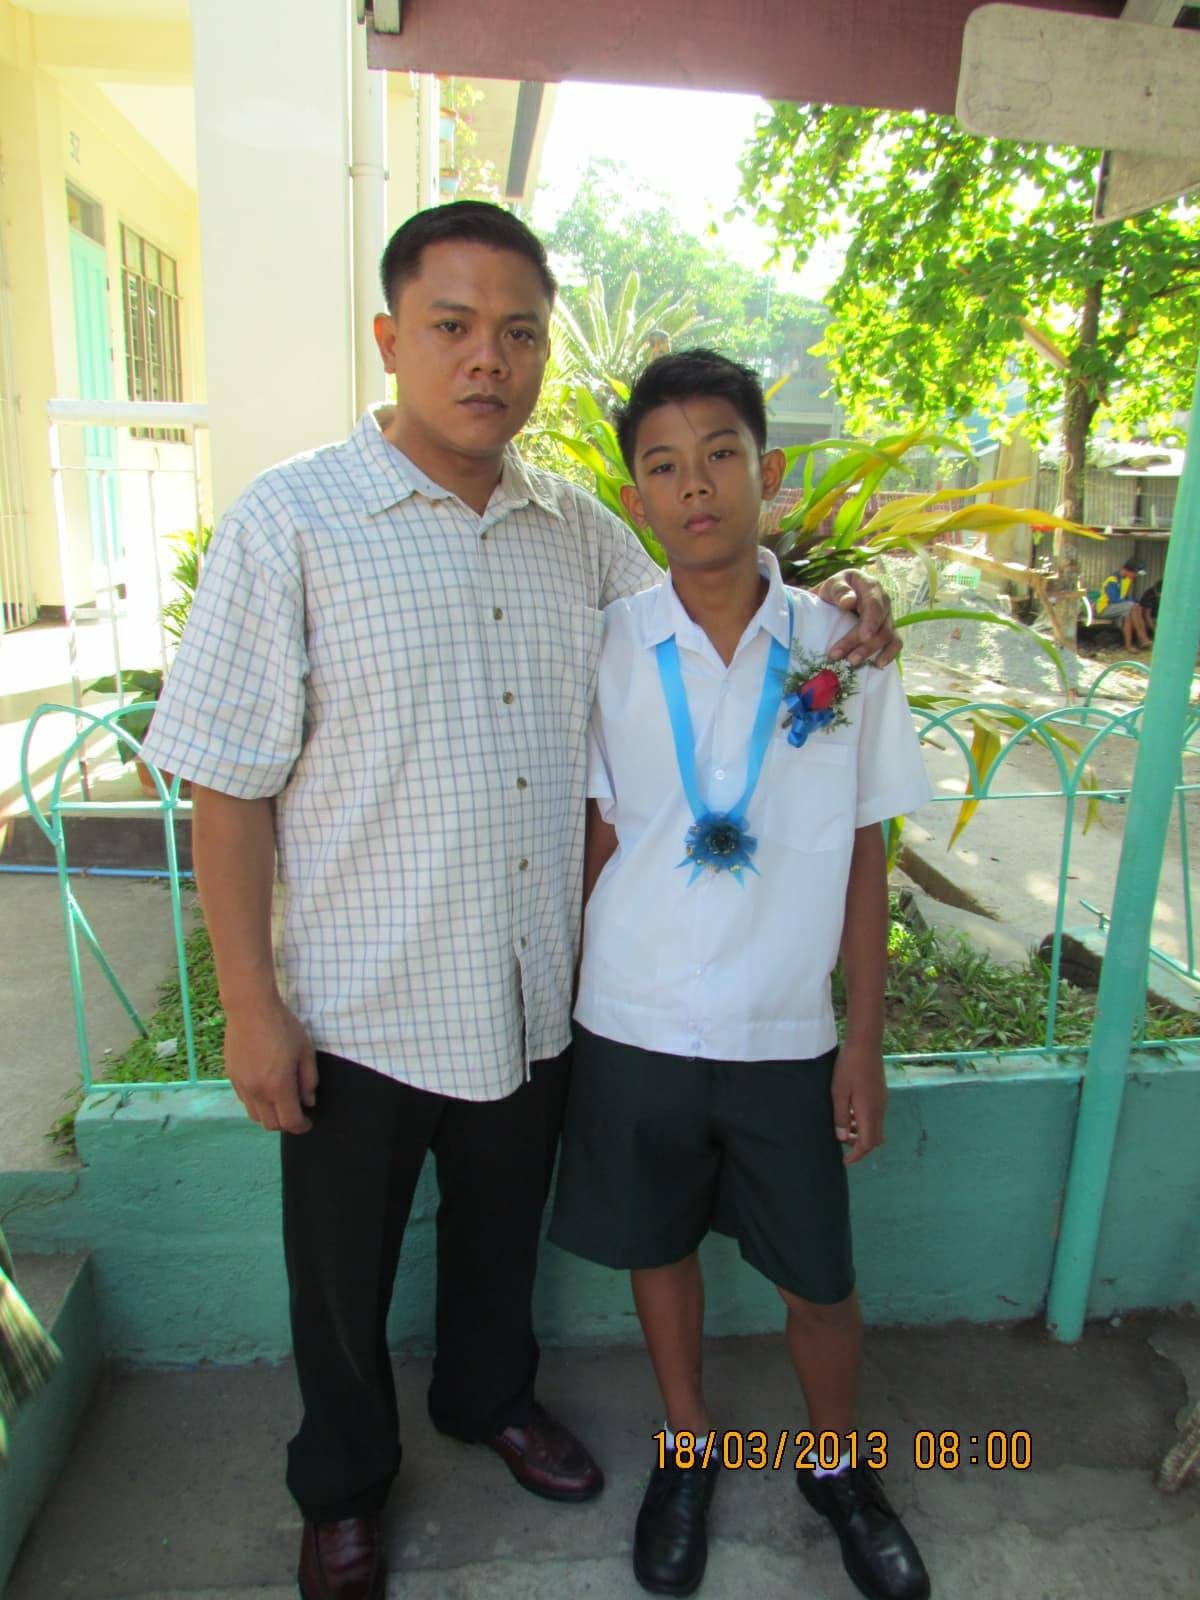 PROUD. Joaquin poses with his son Kiesten during his elementary graduation. Photo from Joaquin Nonan  